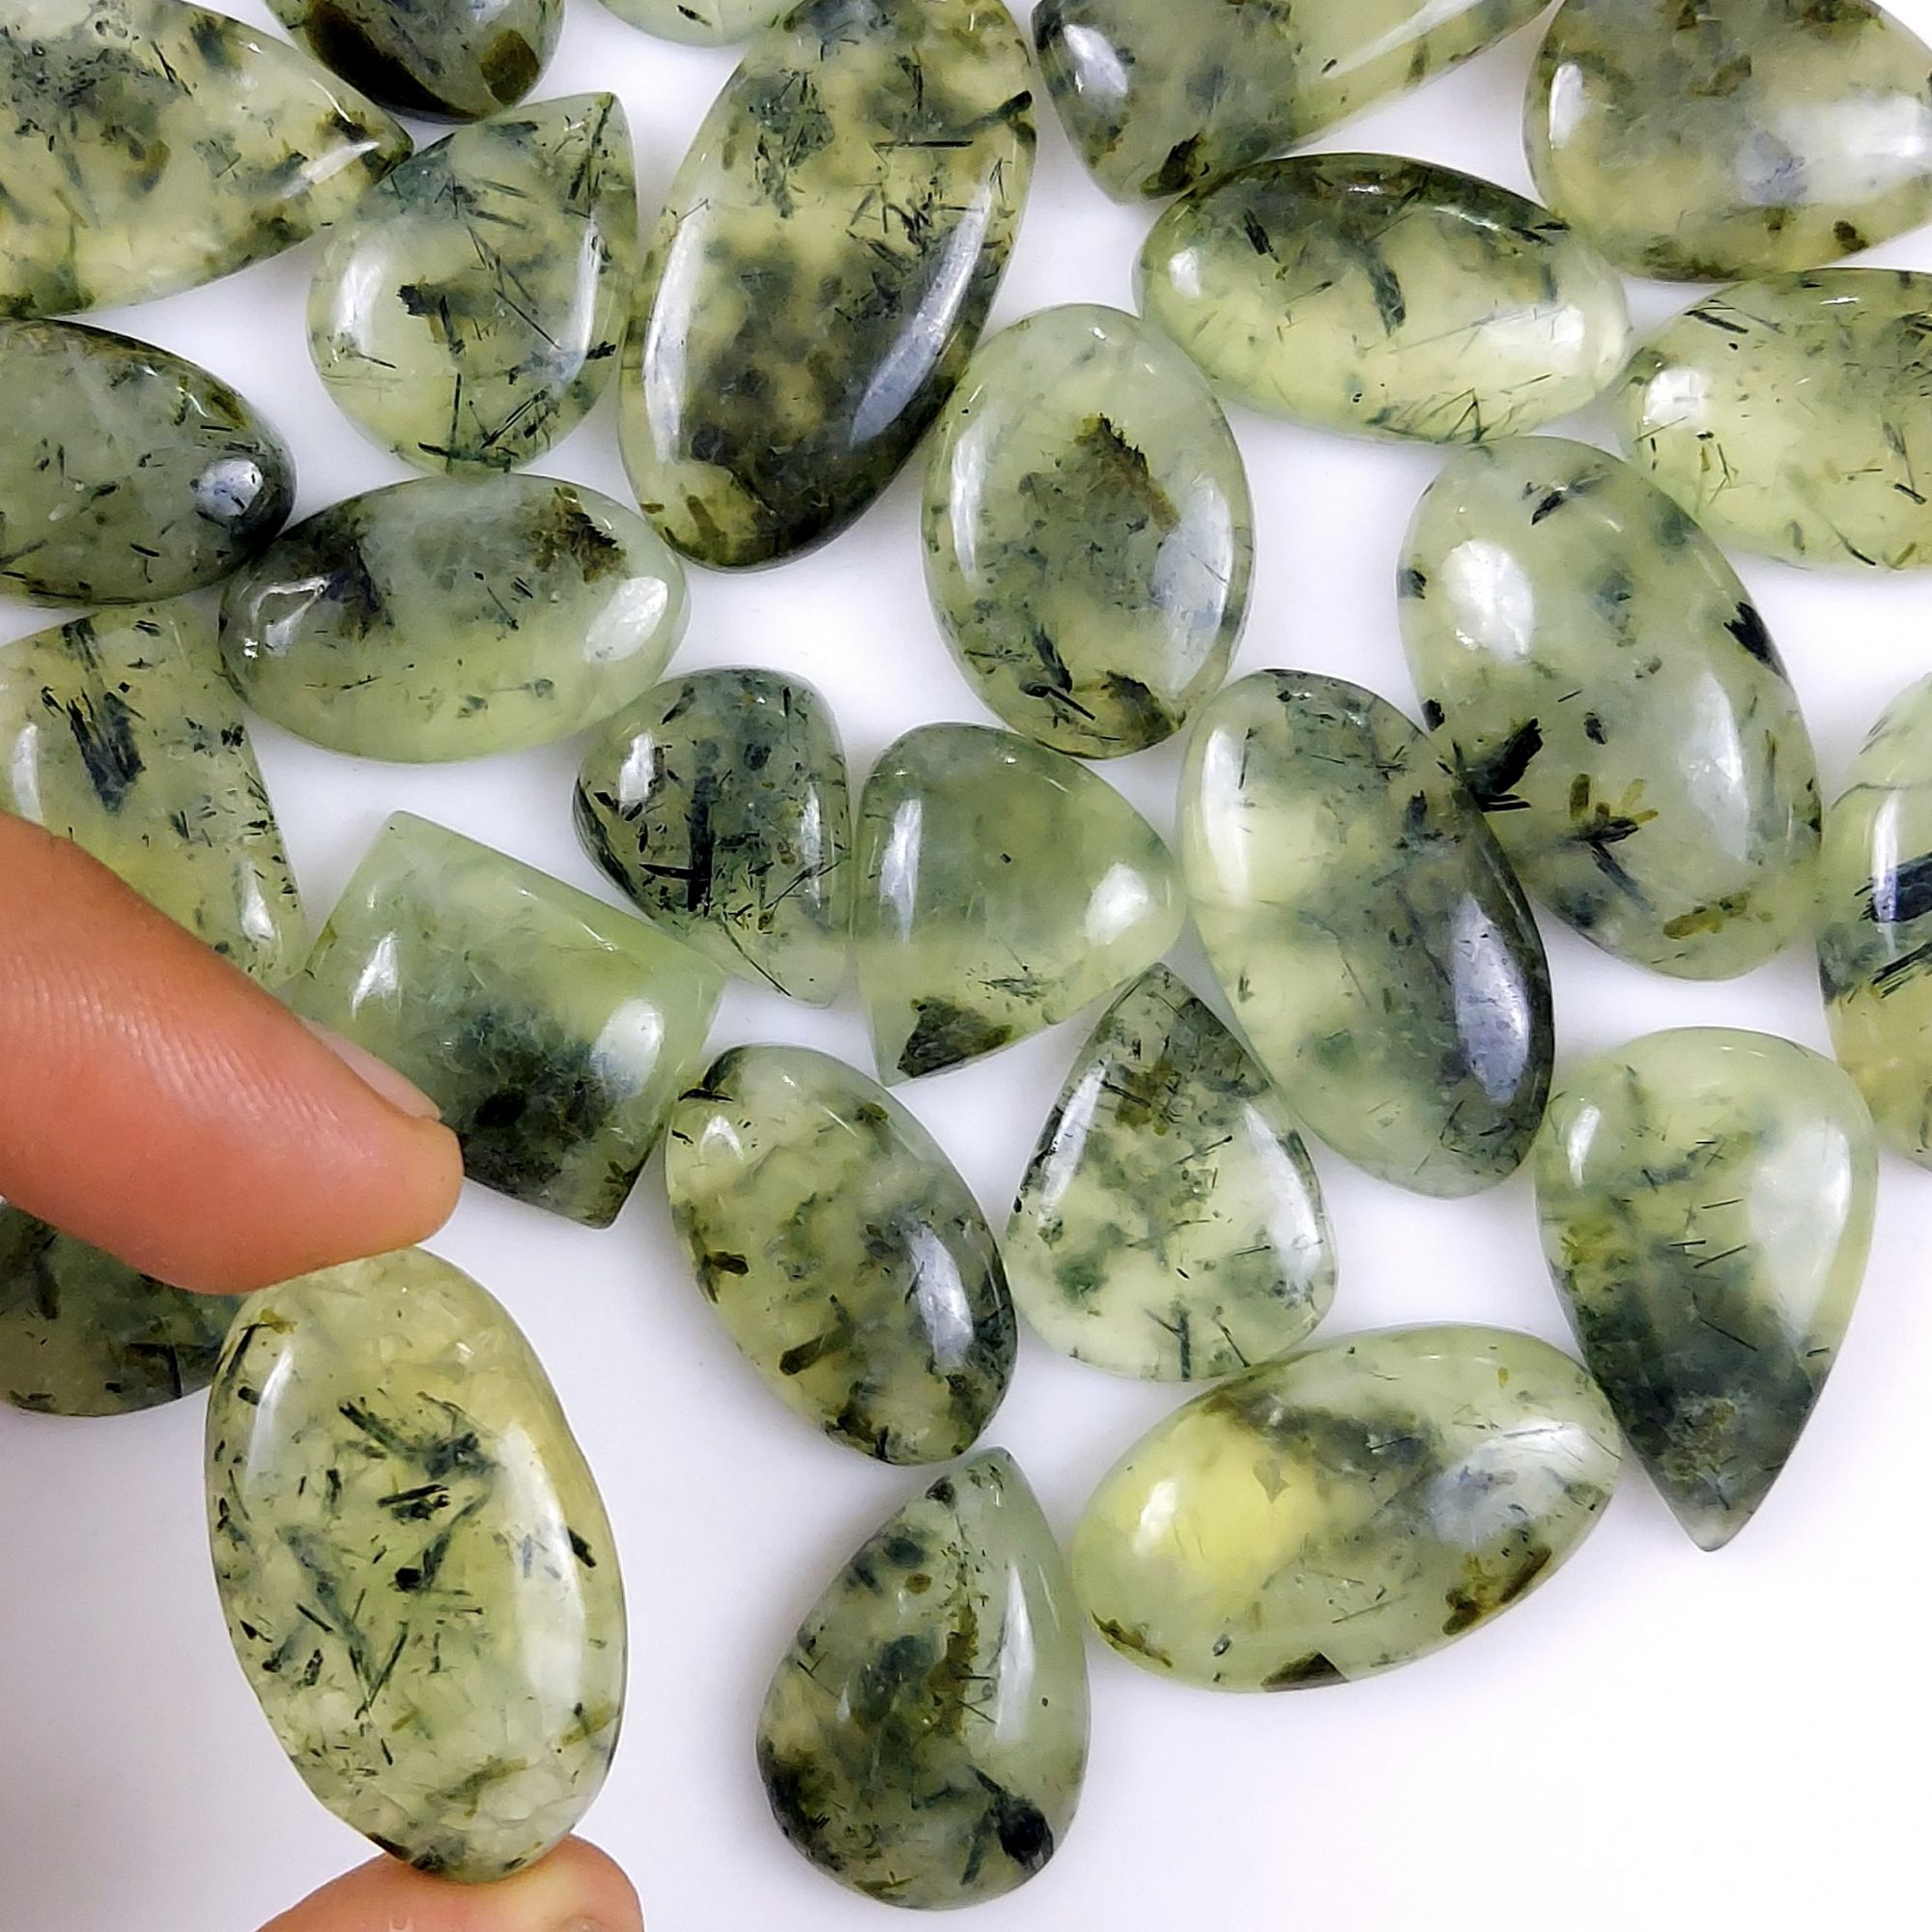 28Pcs 891Cts Natural Green Prehnite Loose Cabochon Gemstone Lot For Jewelry Making  35x17 18x14mm#1229